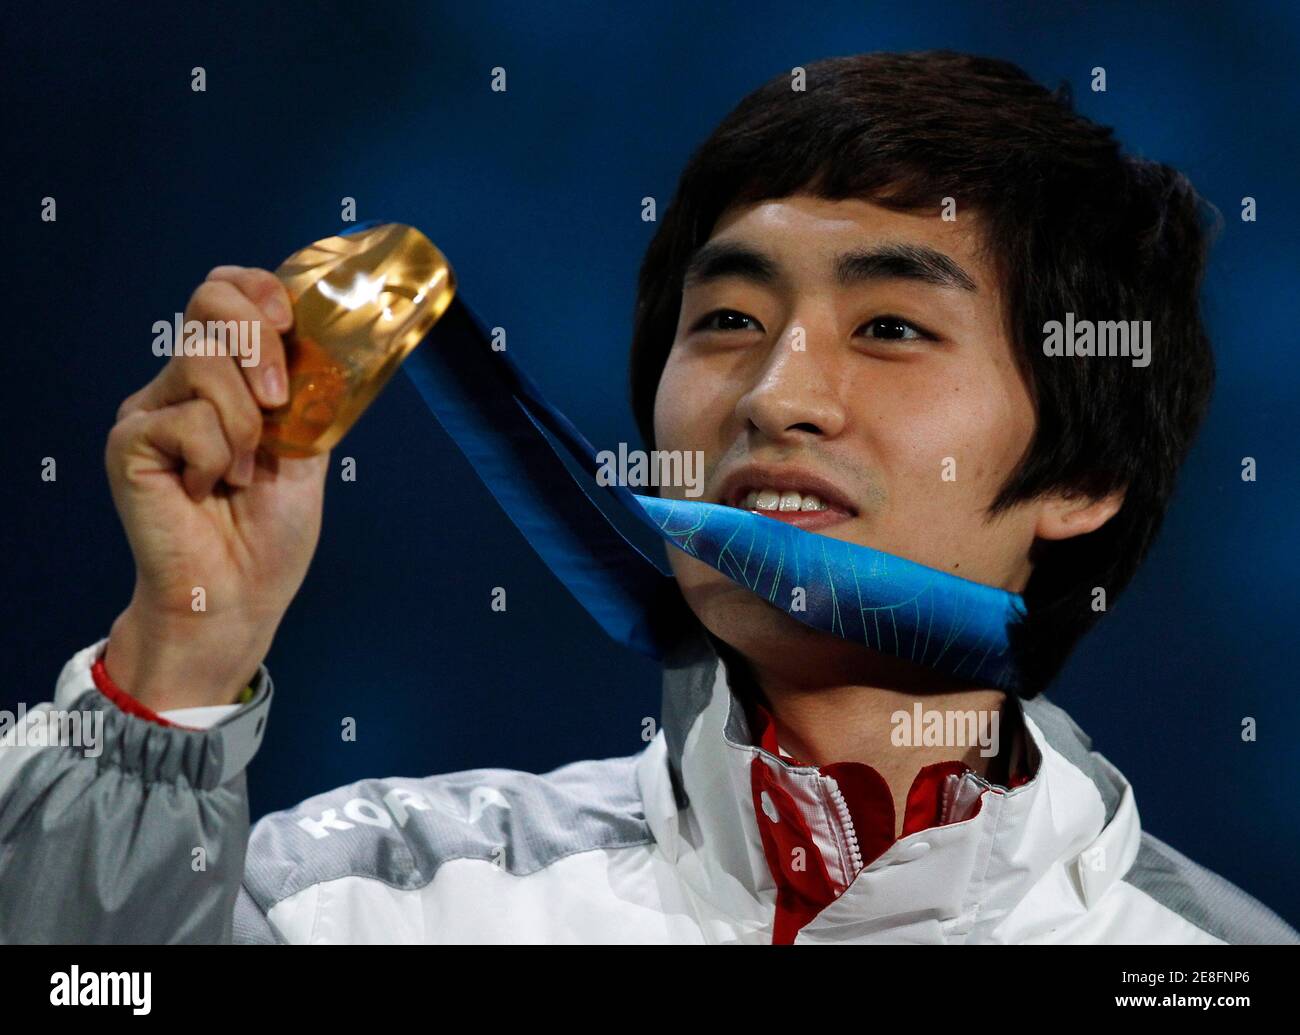 Lee Seung-hoon of South Korea displays his gold medal during the medal ceremony for the men's 10000 metres speed skating competition at the Vancouver 2010 Winter Olympics February 23, 2010.     REUTERS/Jerry Lampen (CANADA) Stock Photo